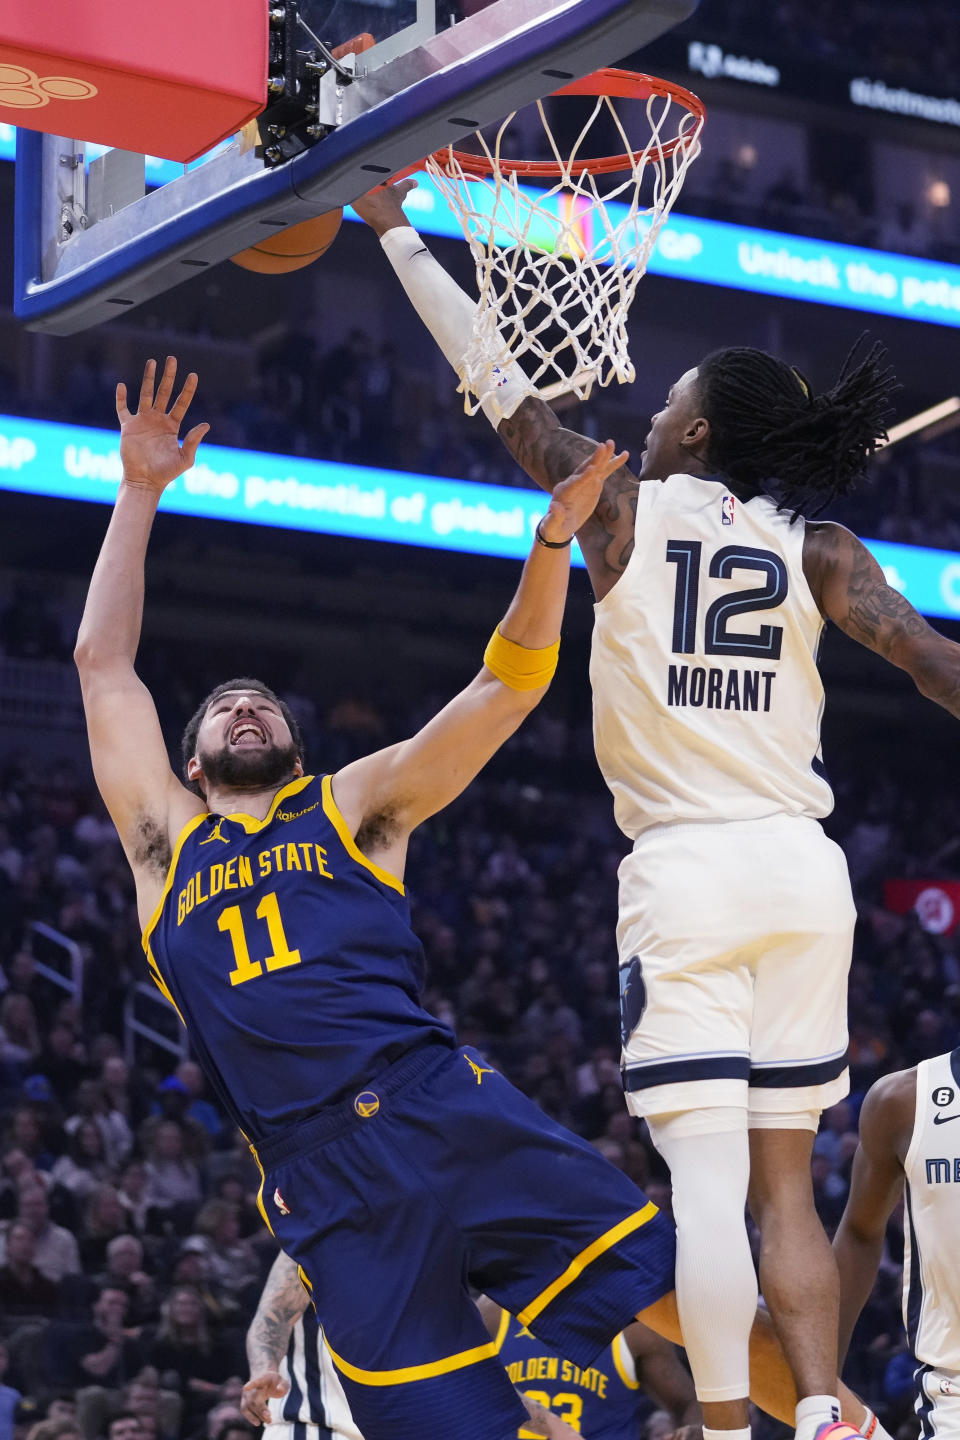 Memphis Grizzlies guard Ja Morant, right, blocks a shot by Golden State Warriors forward Klay Thompson during the first half of an NBA basketball game in San Francisco, Wednesday, Jan. 25, 2023. (AP Photo/Godofredo A. Vásquez)